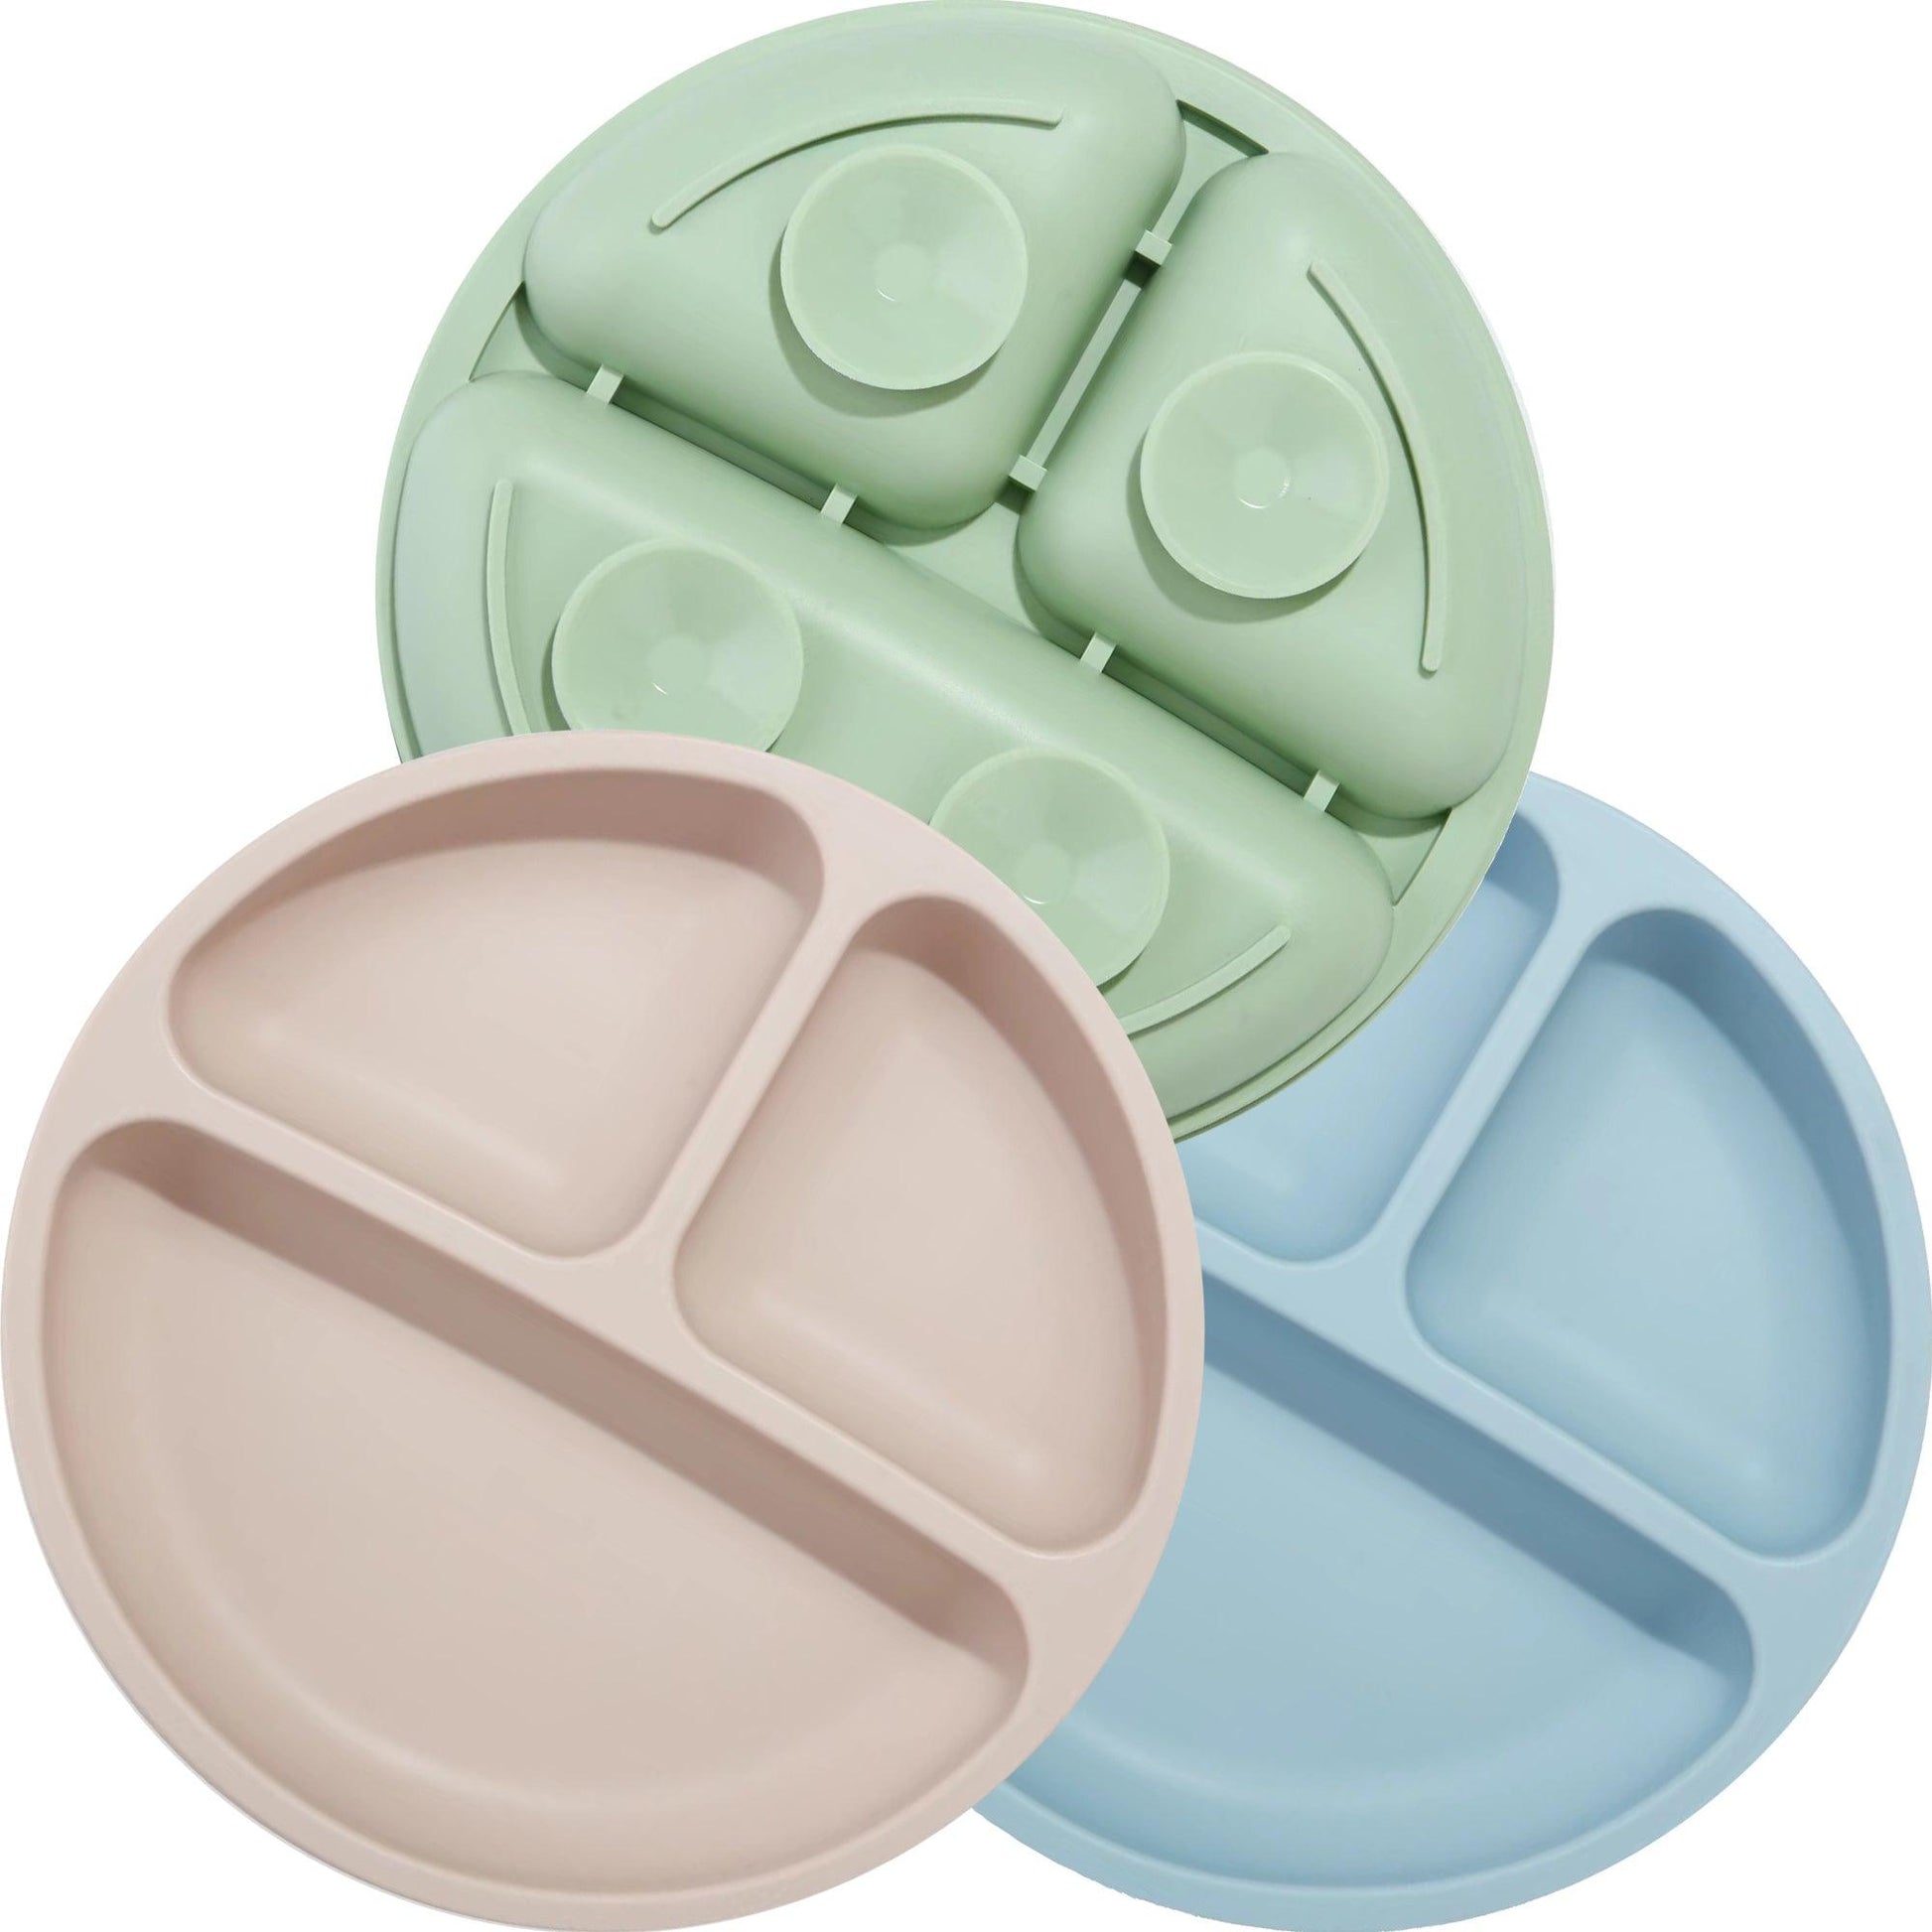 Divided Unbreakable Silicone Baby and Toddler Plates - PandaEar